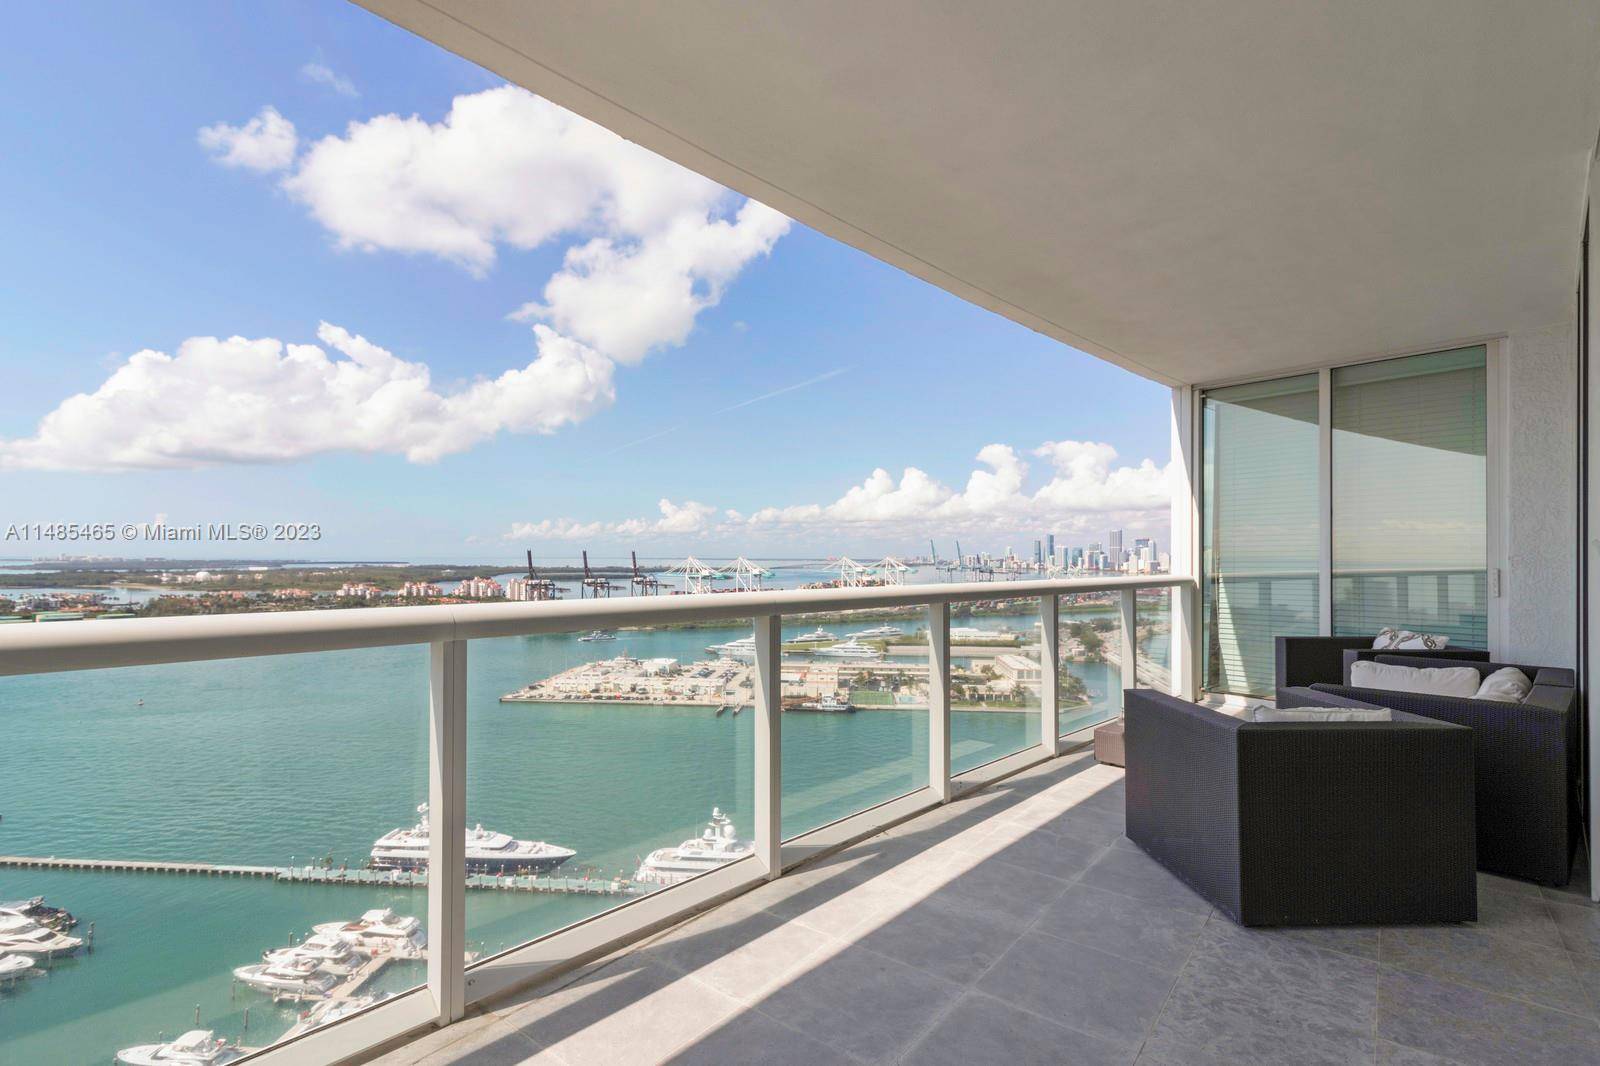 Beautiful 03 line on a high floor in superb original condition offers the best views on Fisher island, the bay and Miami skyline.